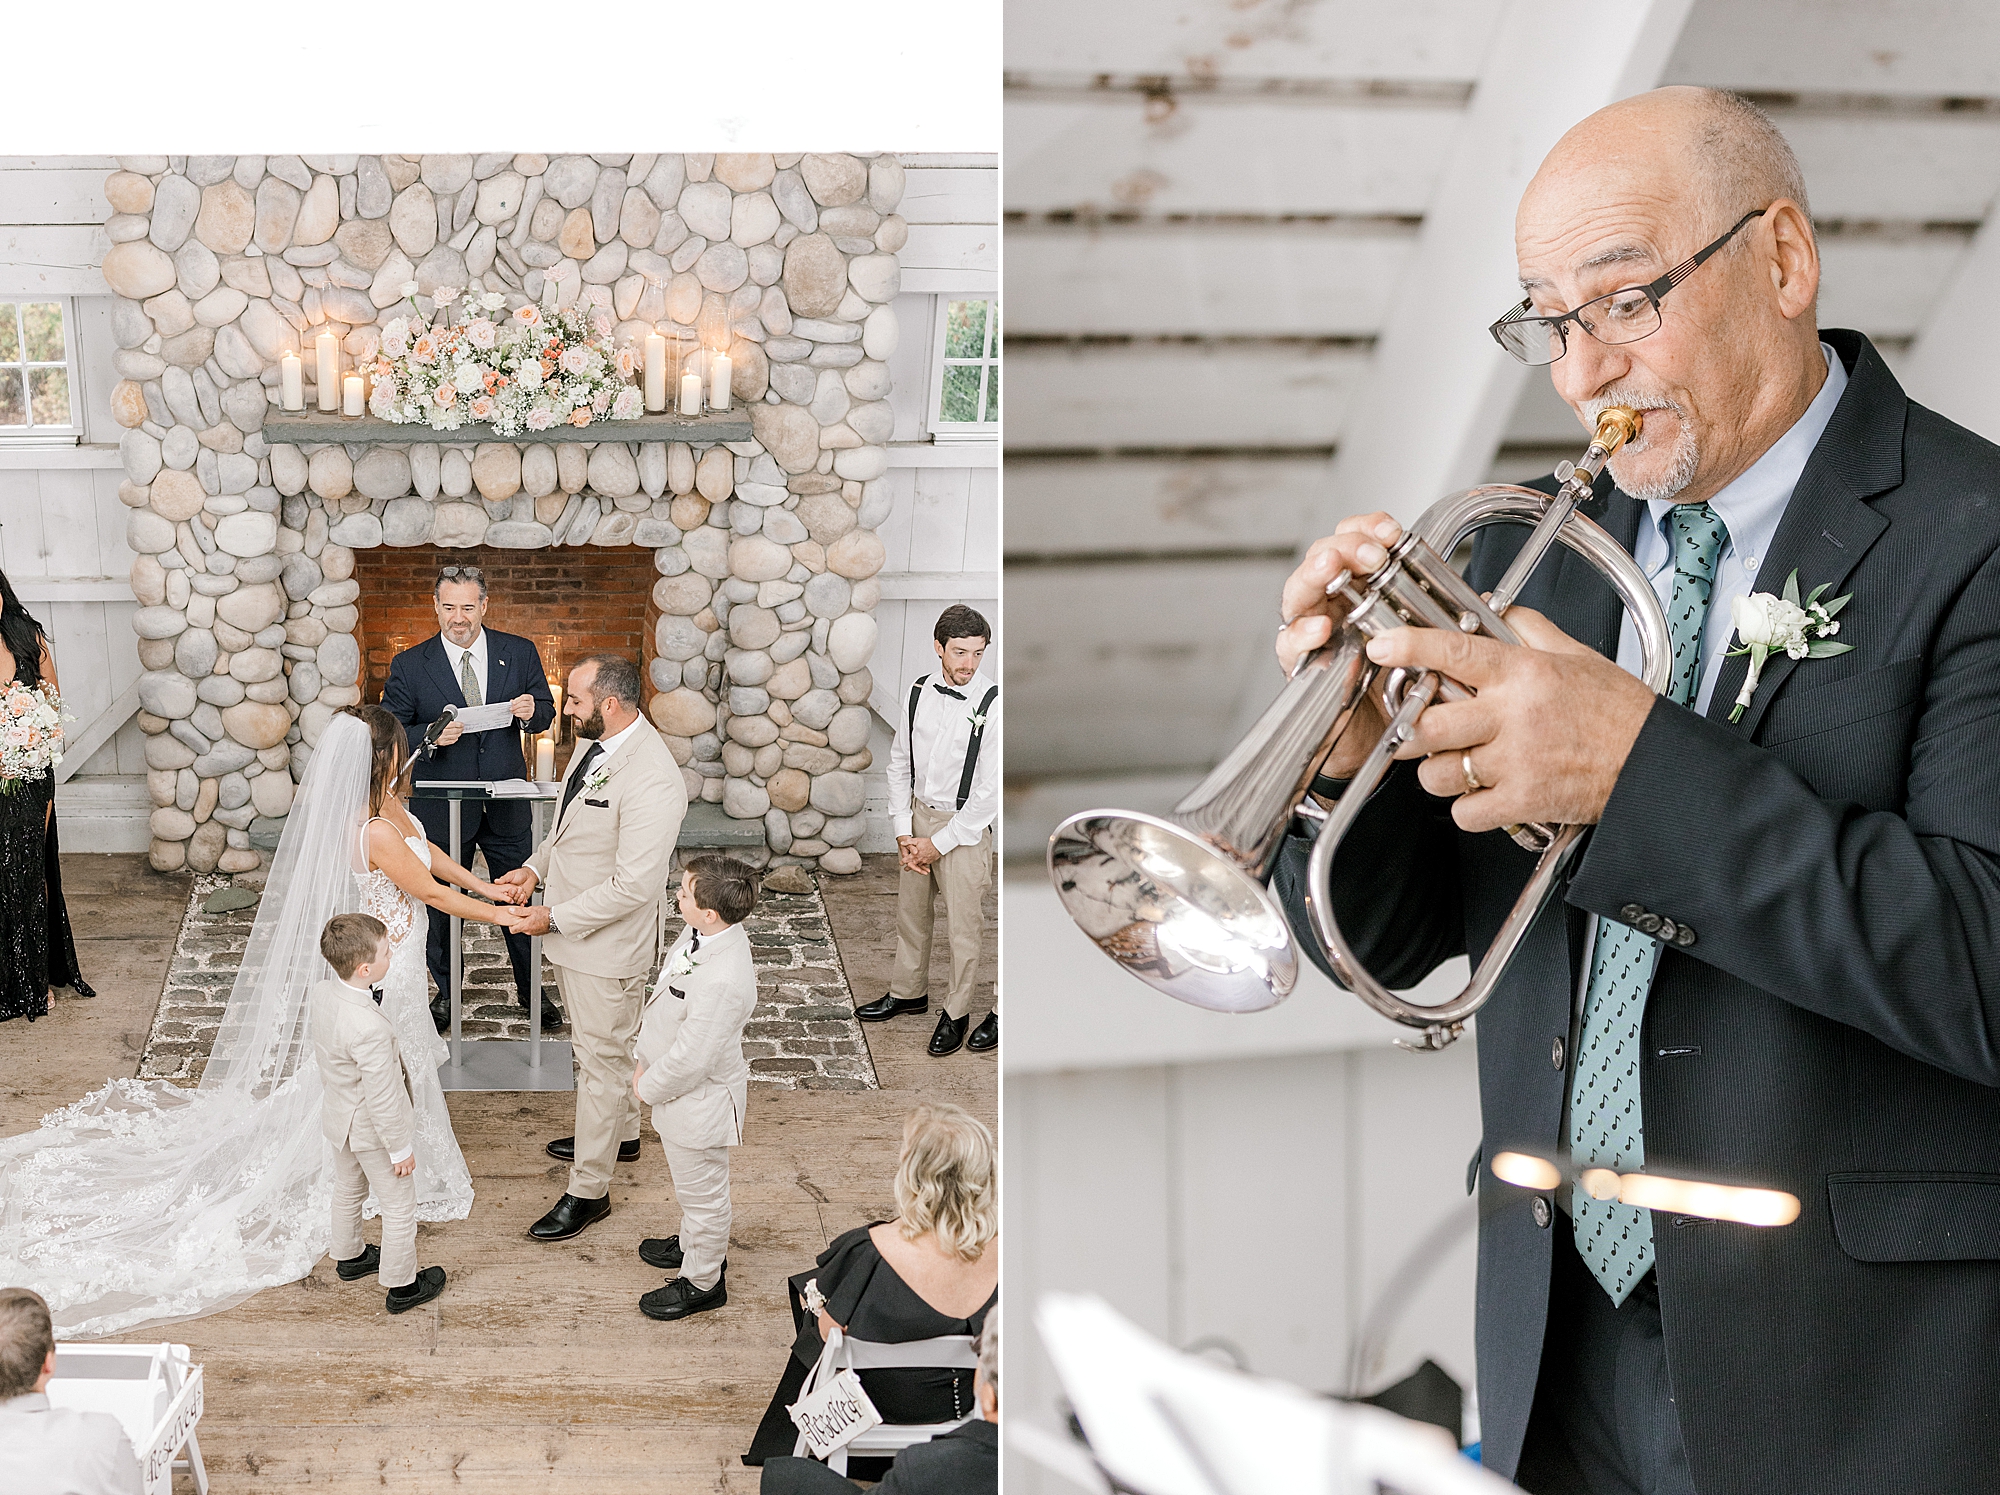 trumpet player performs during wedding ceremony at Bonnet Island Estate